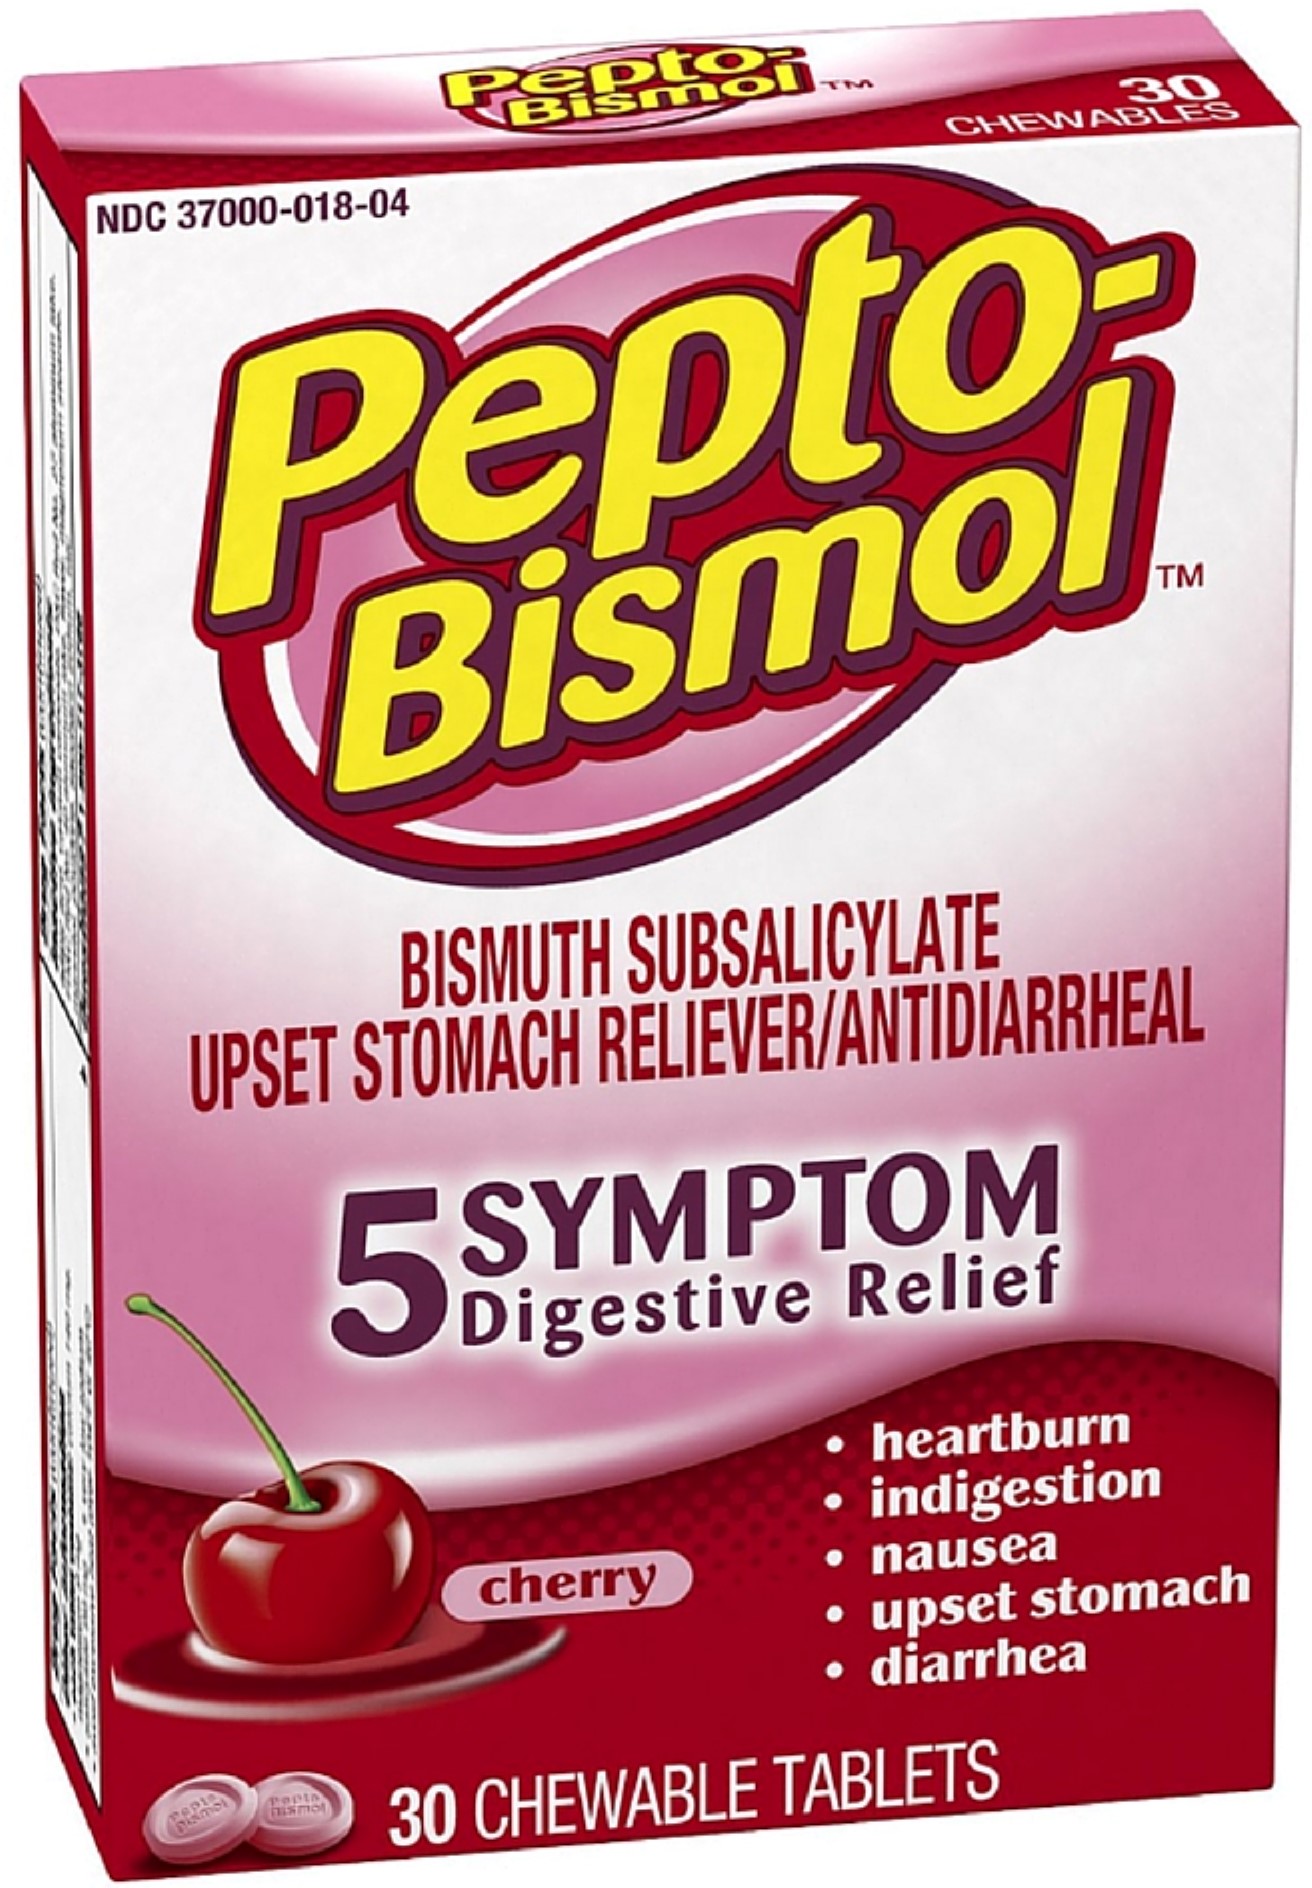 Pepto-Bismol 5 Symptoms Digestive Relief Chewable Tablets, Cherry 30 Each - image 1 of 5